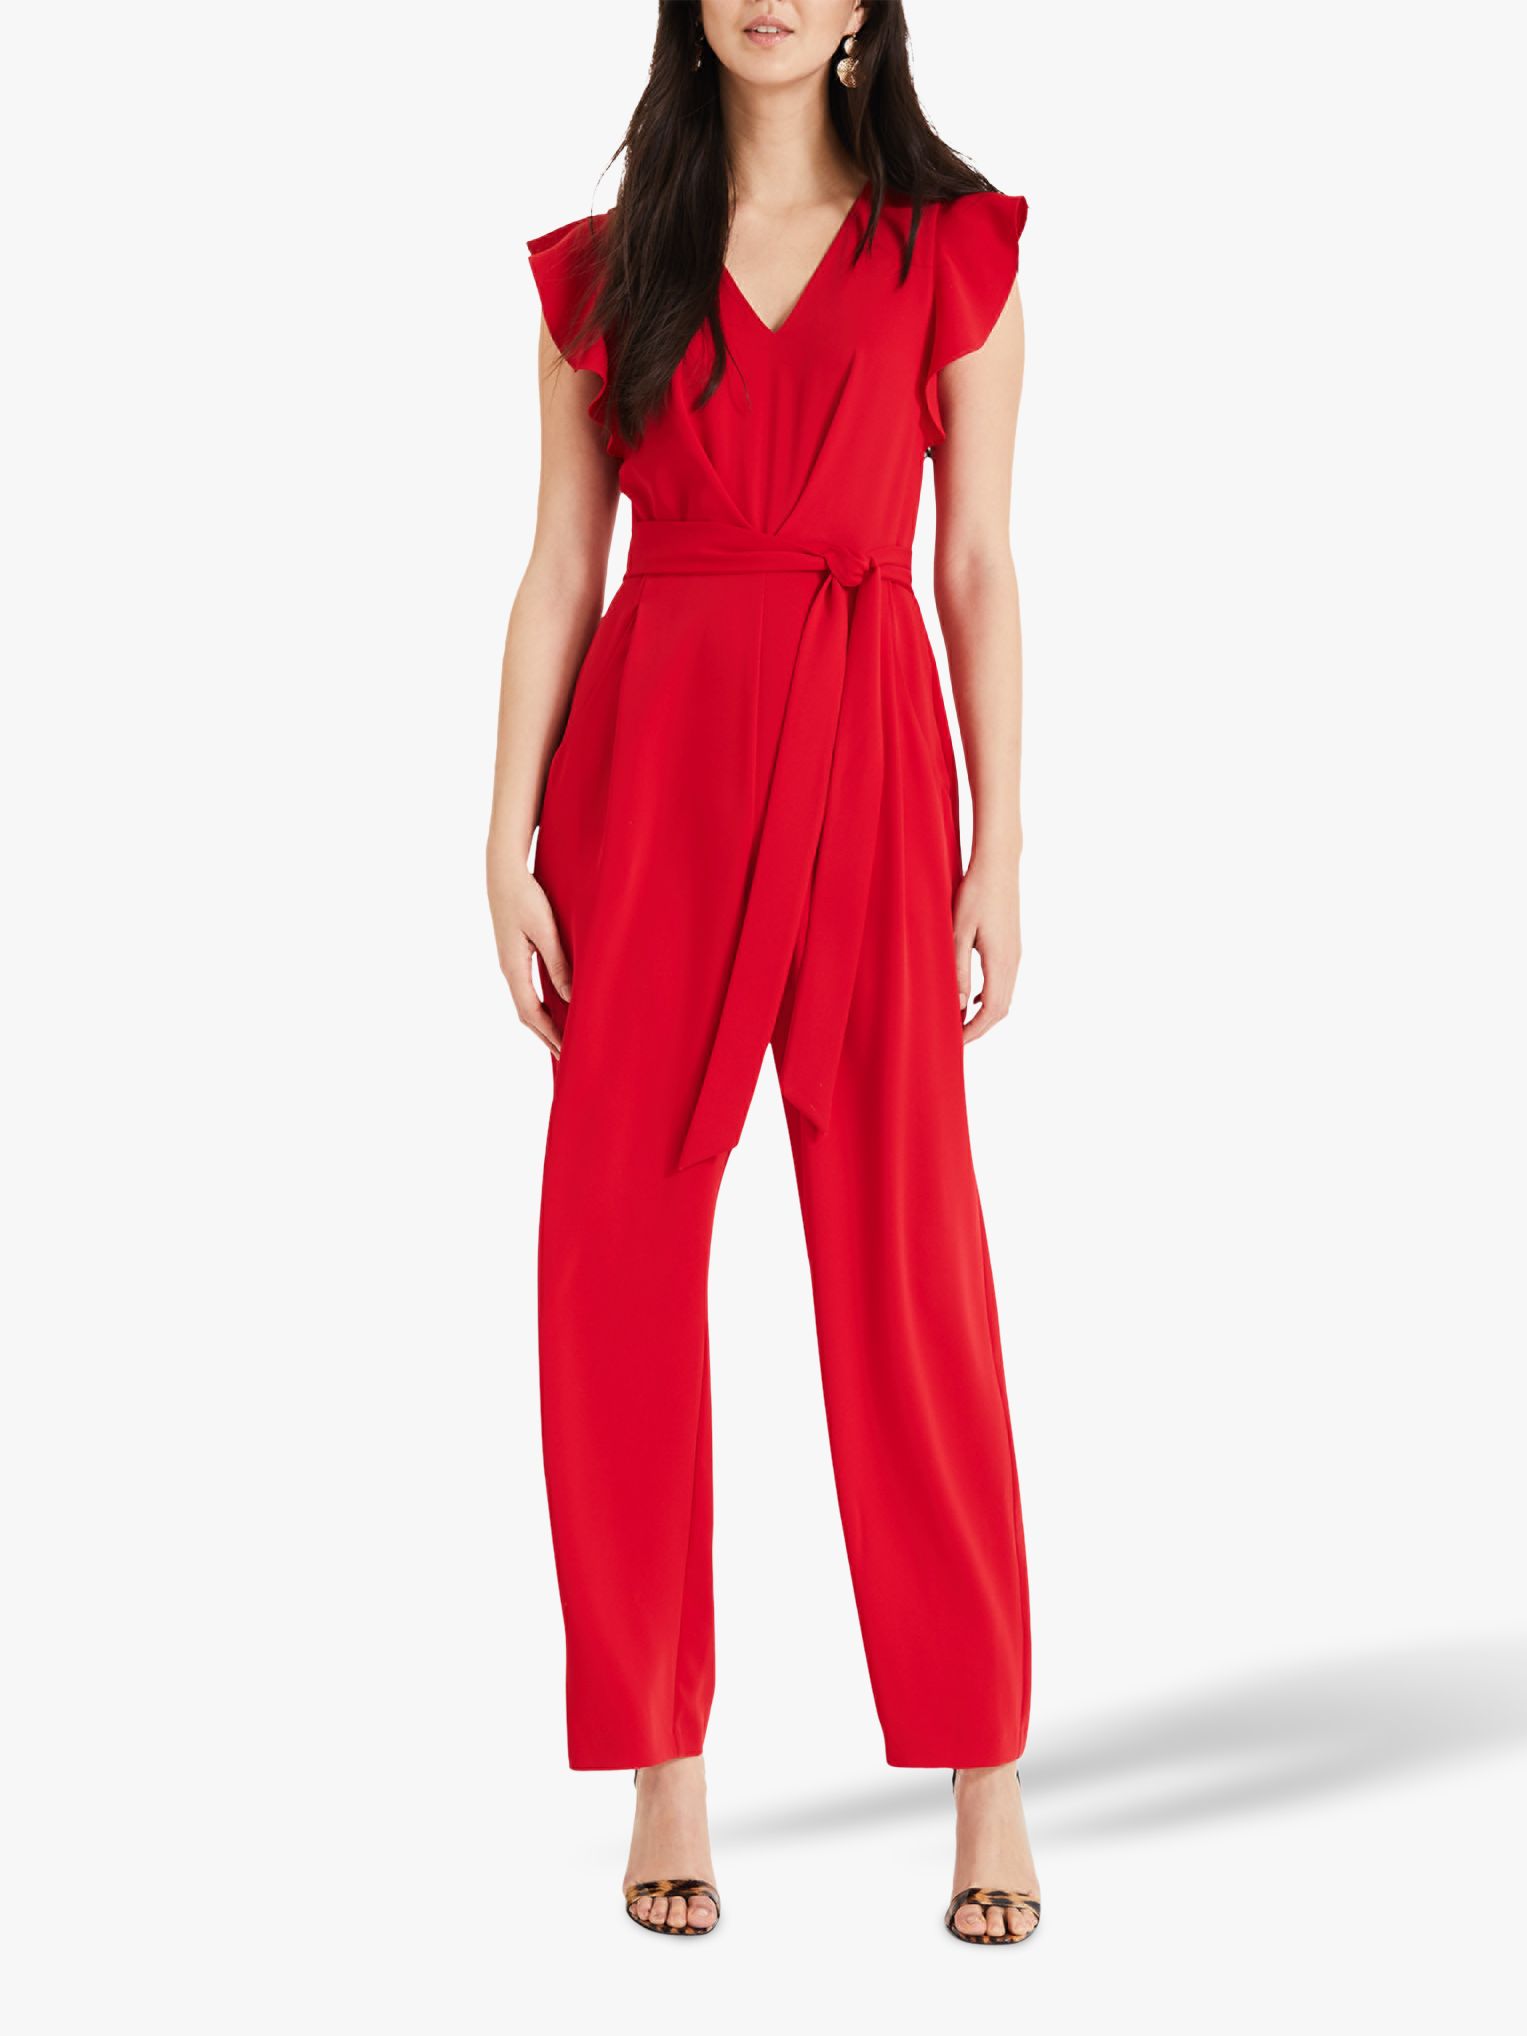 phase 8 red jumpsuit